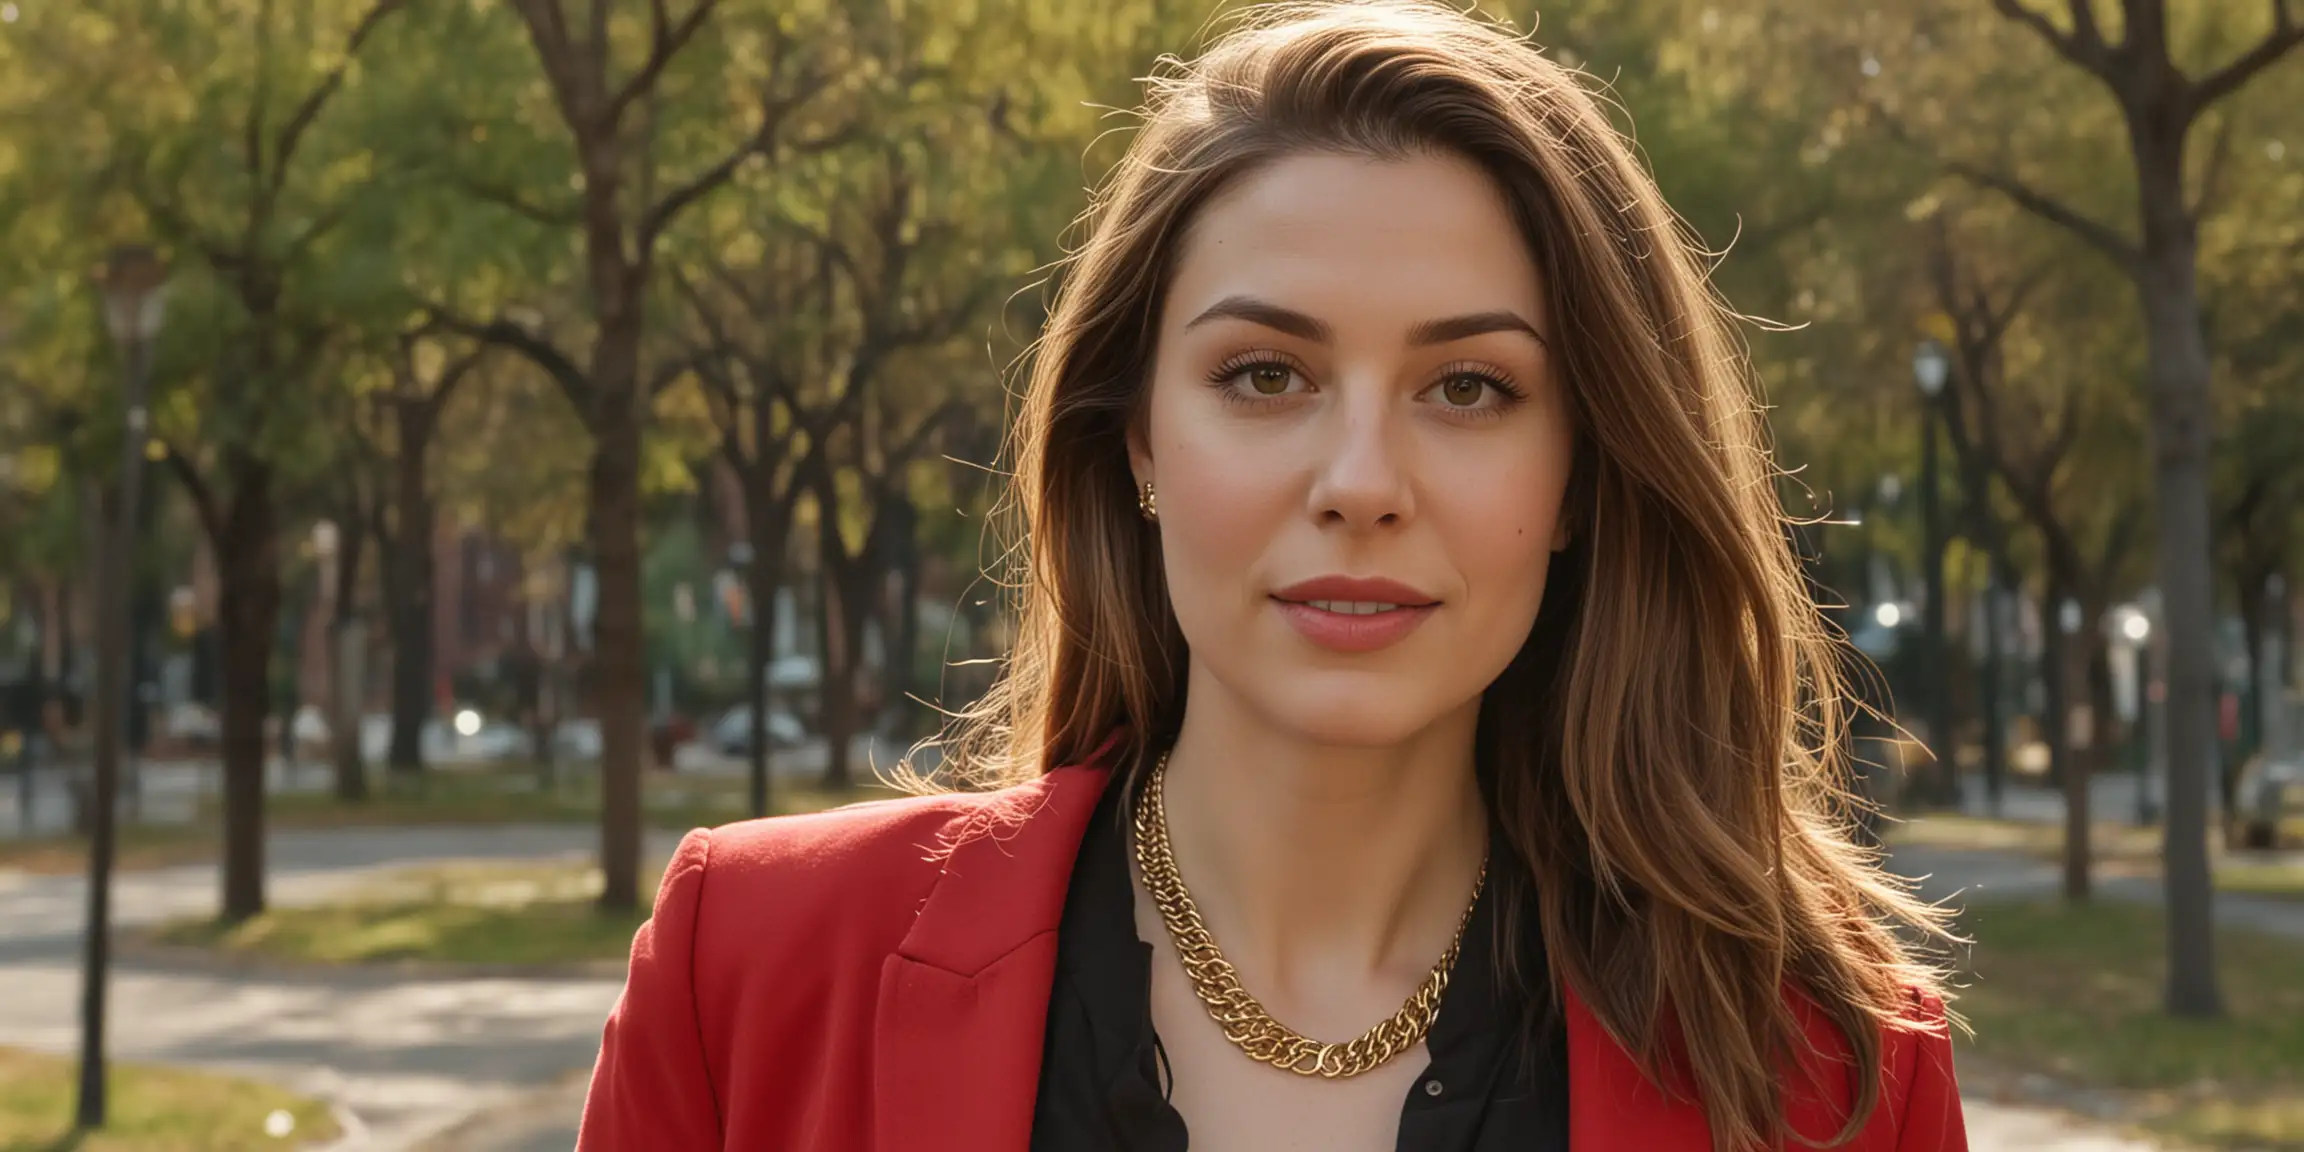 30 year old pale white woman with long medium brown hair parted to the right, big eyelashes, red blazer, gold necklace, black shirt and black trousers, urban park background